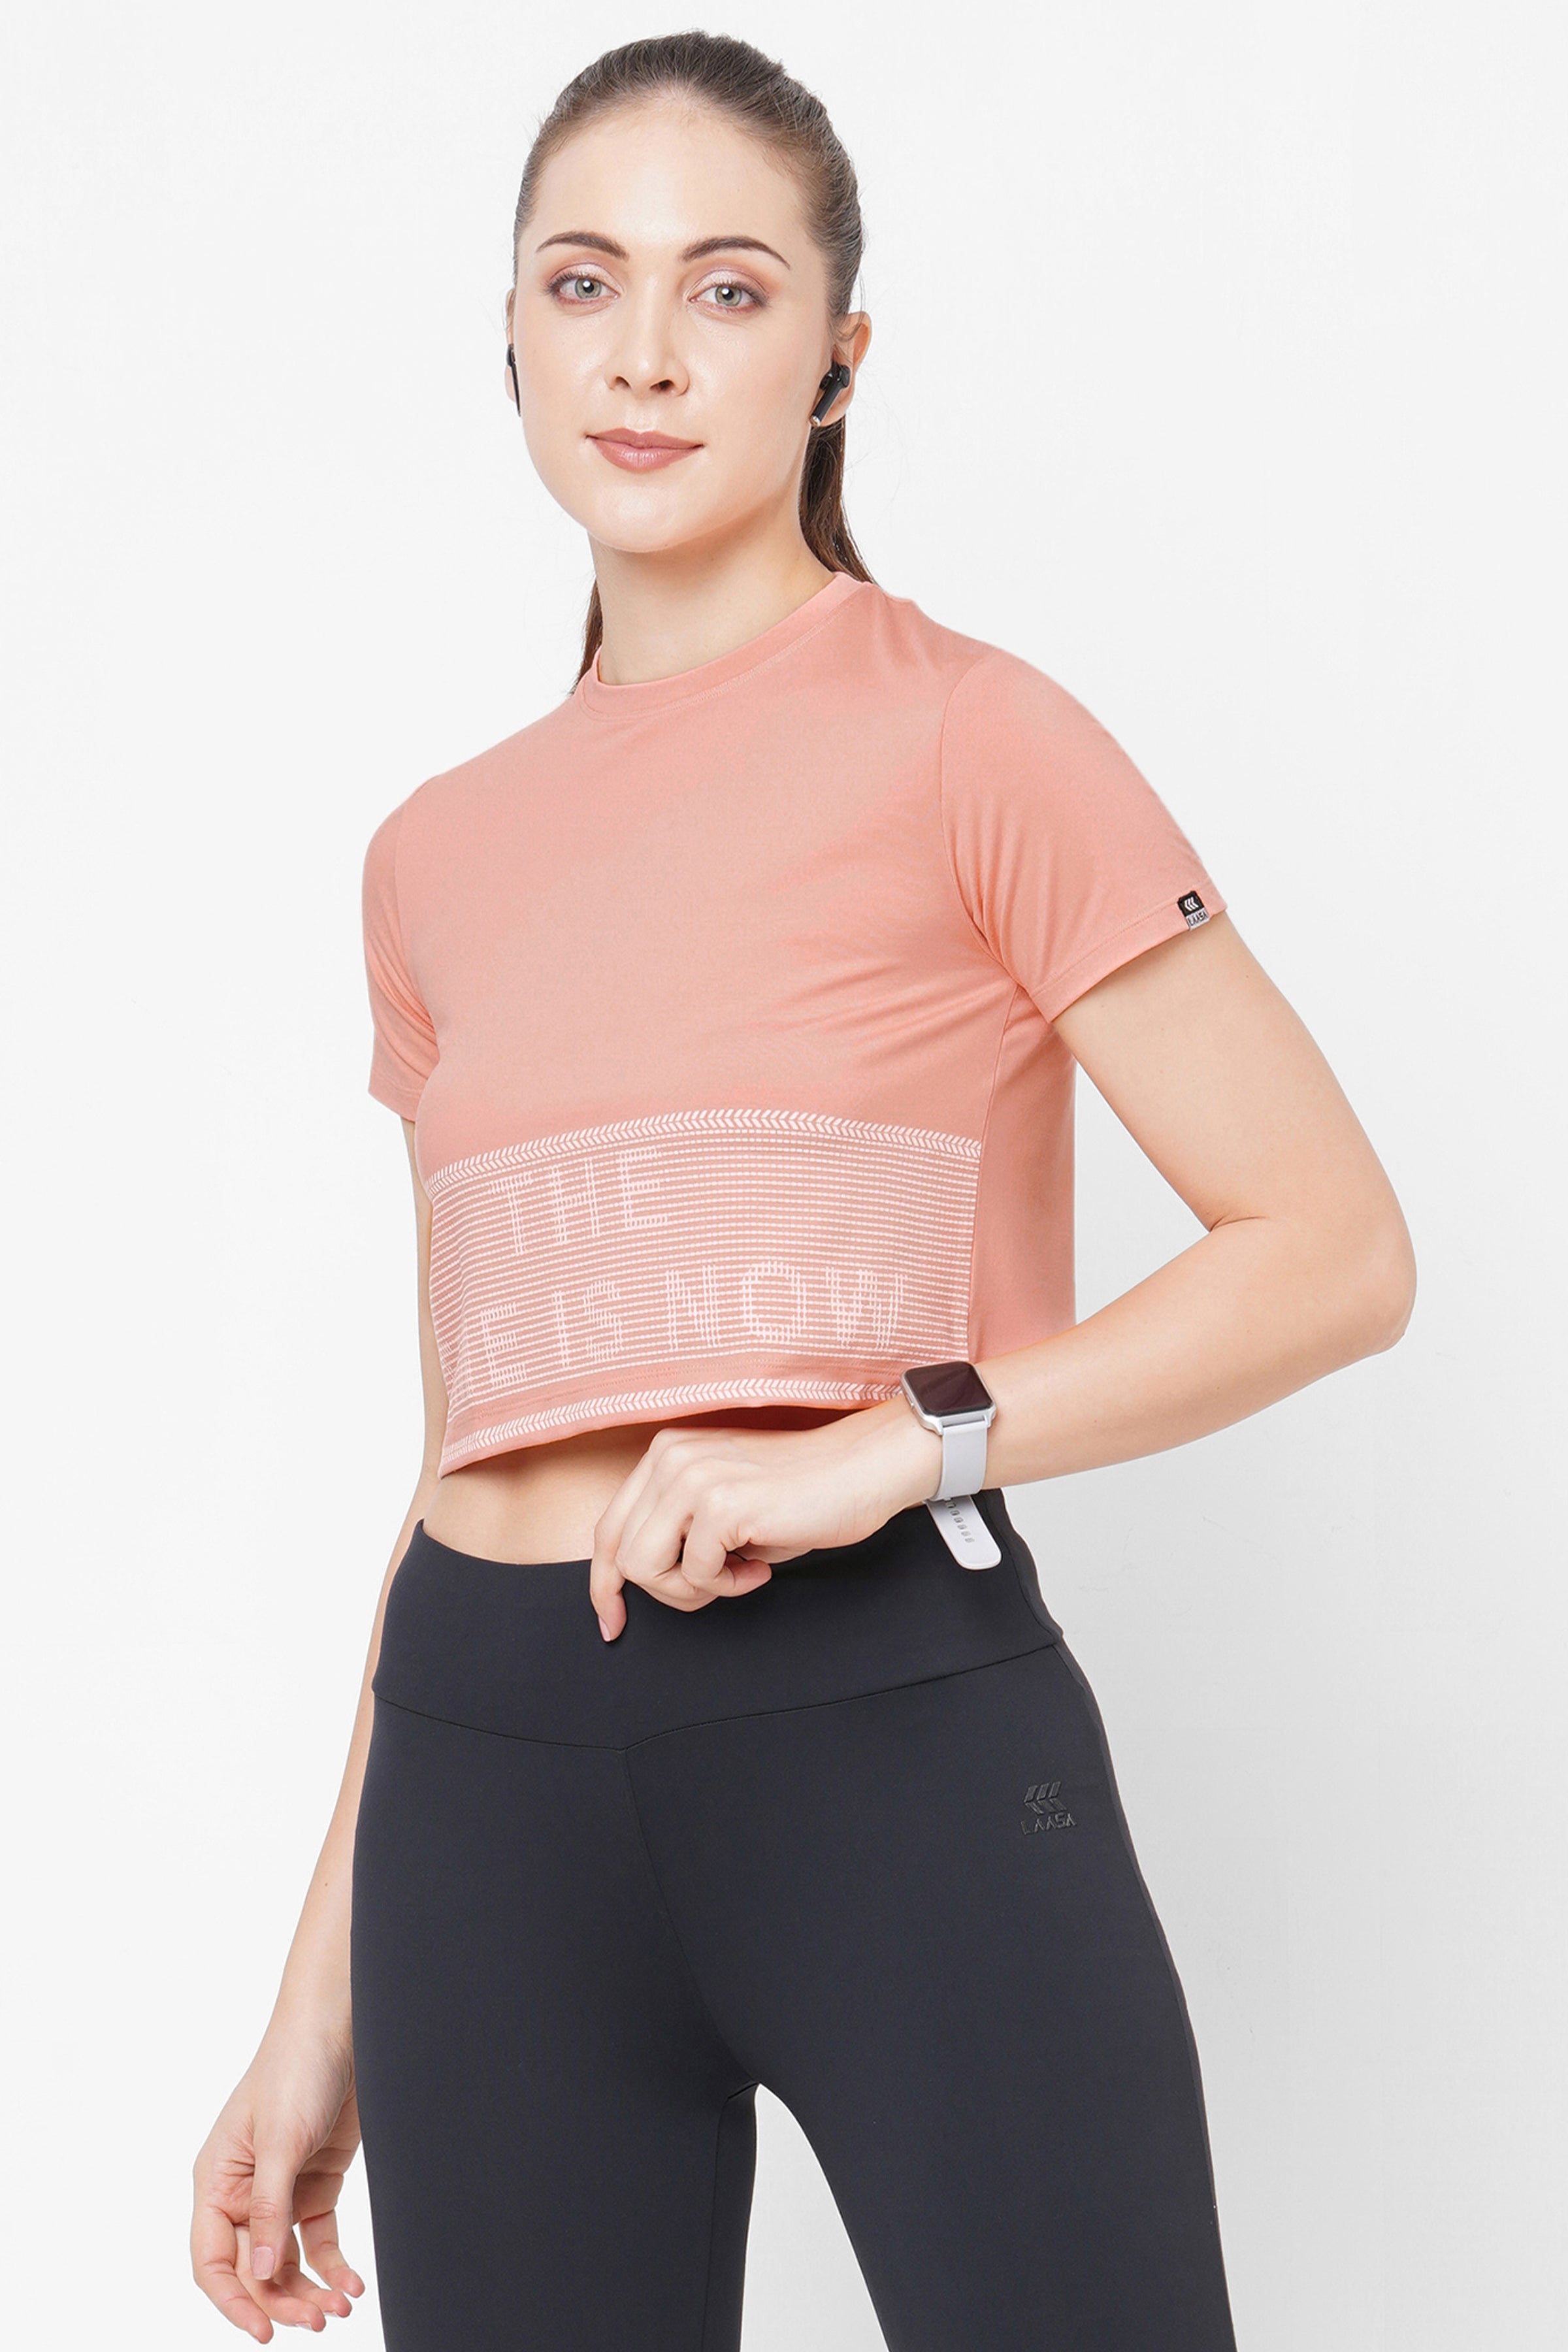 Laasa Sports  JUST-DRY Workout Mesh Crop Top for Women